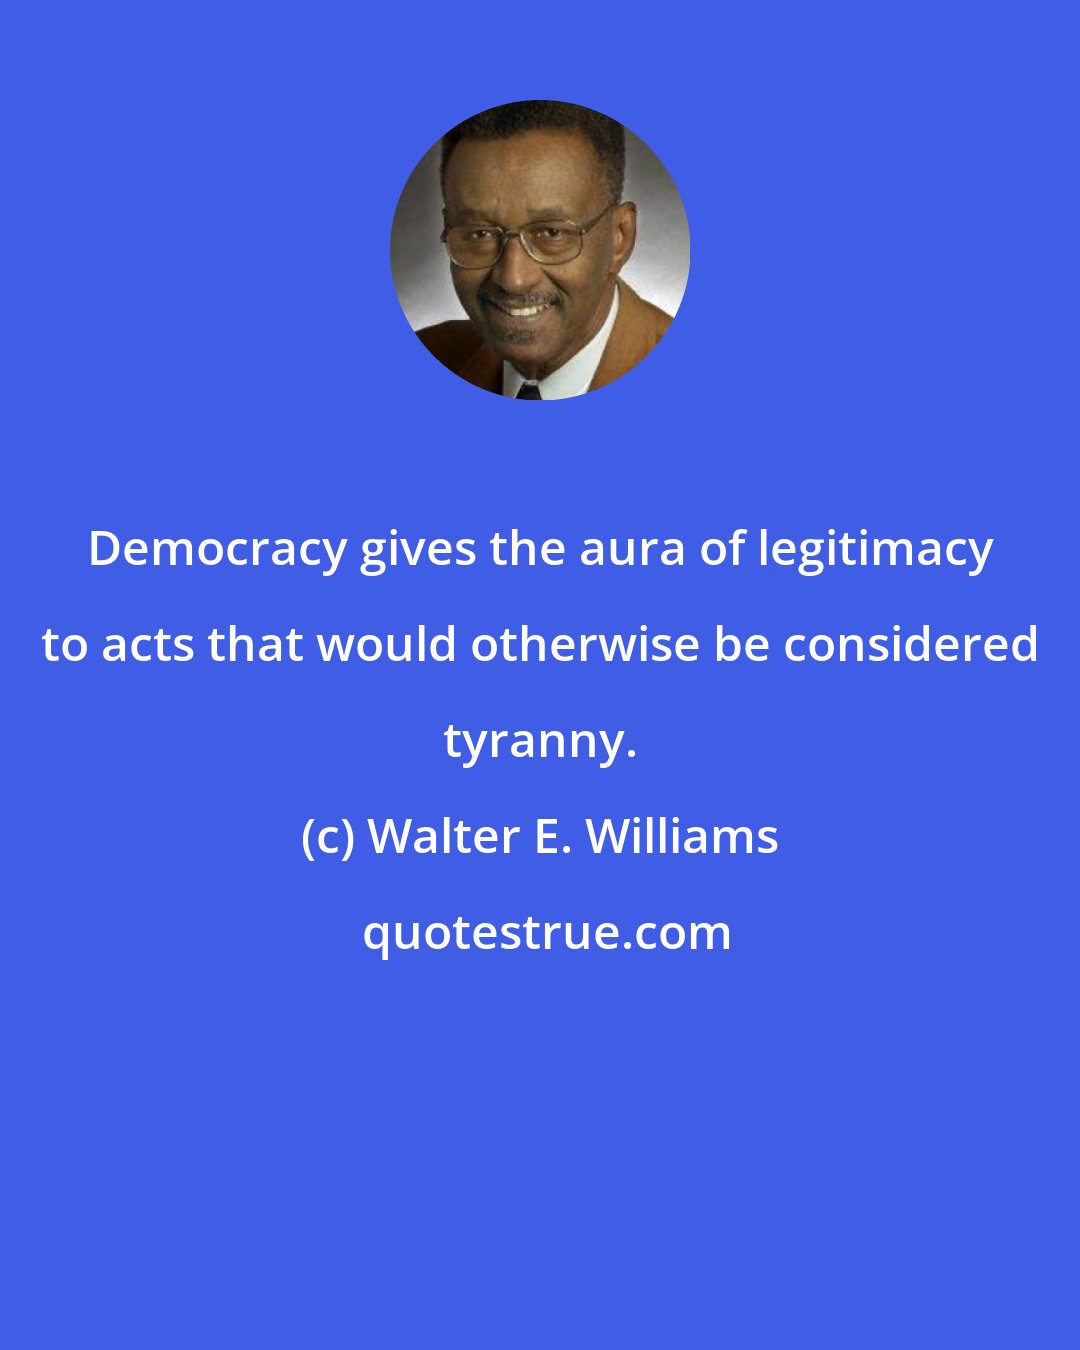 Walter E. Williams: Democracy gives the aura of legitimacy to acts that would otherwise be considered tyranny.